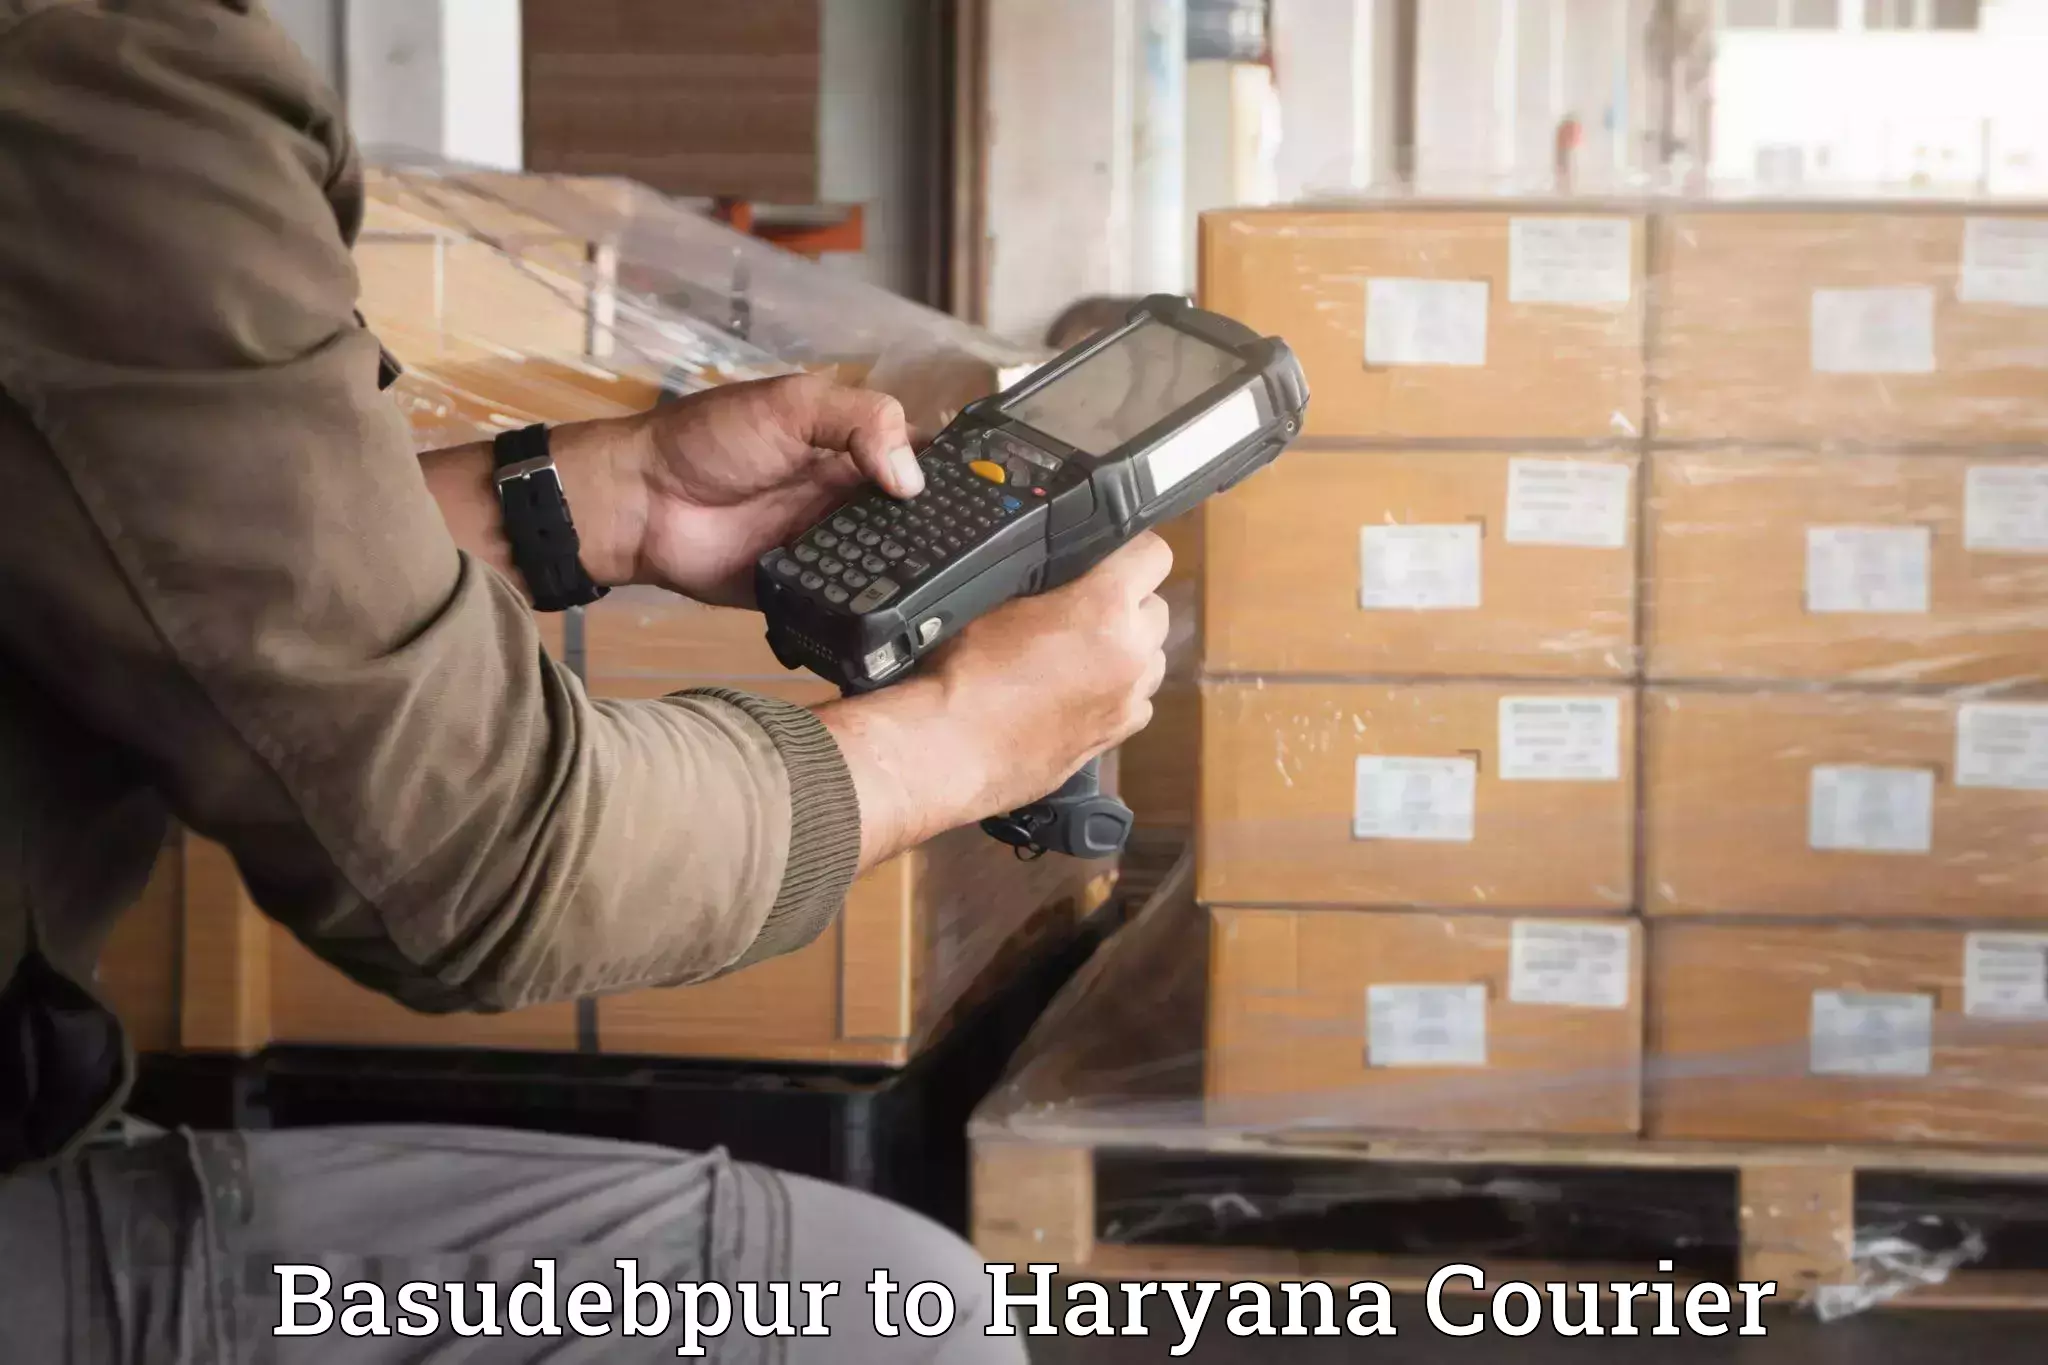 High-quality moving services Basudebpur to Bilaspur Haryana